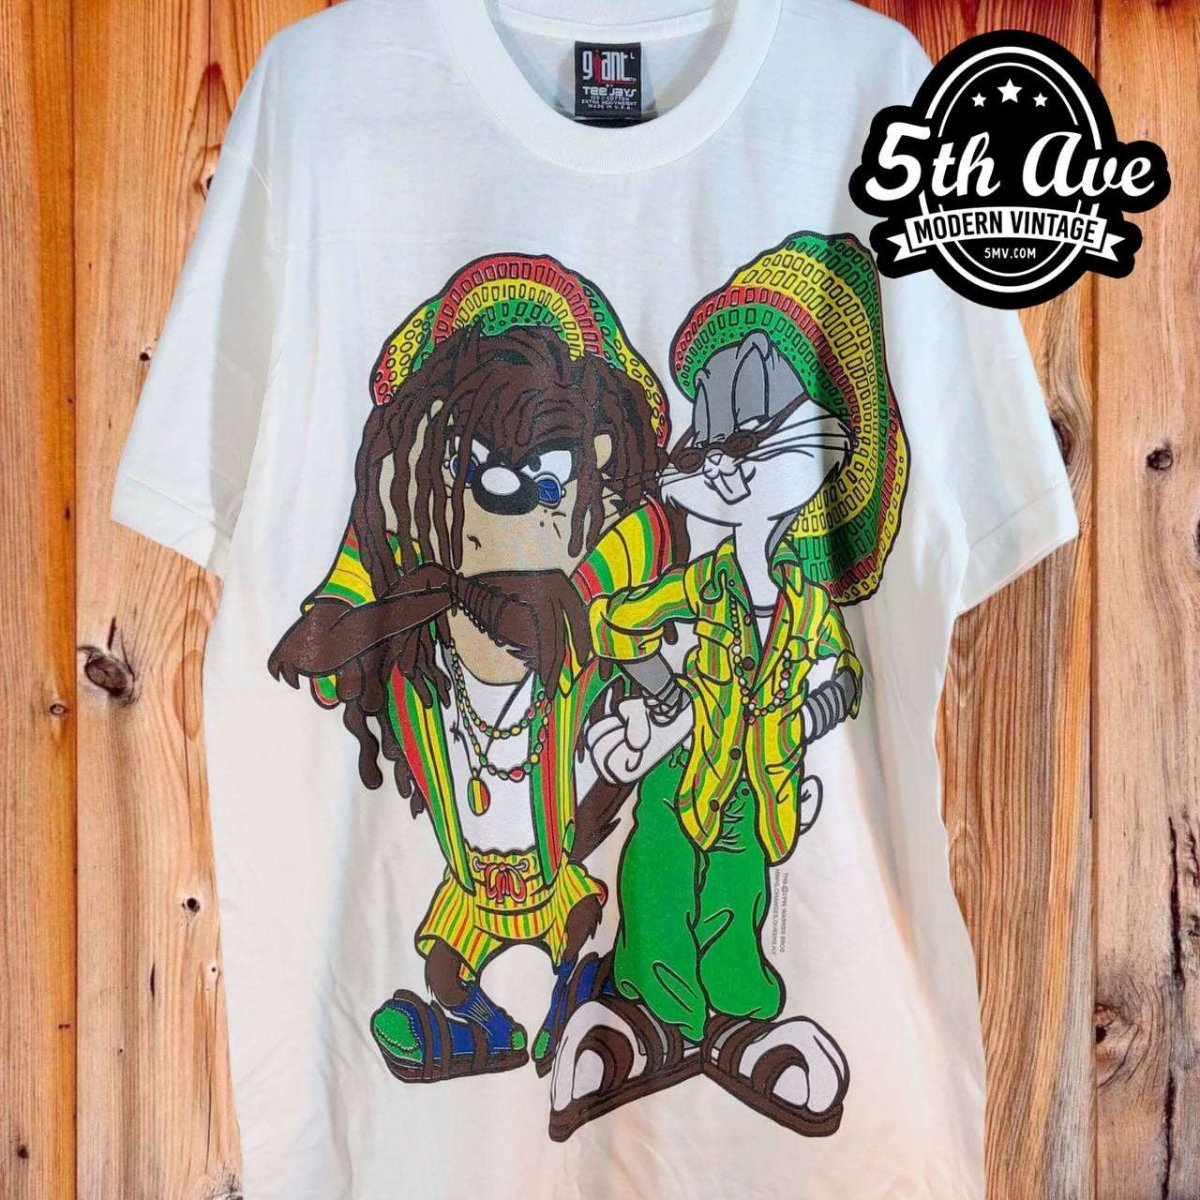 Looney Tunes Bugs Bunny and Tasmanian Devil - New Vintage Animation T shirt - Vintage Band Shirts